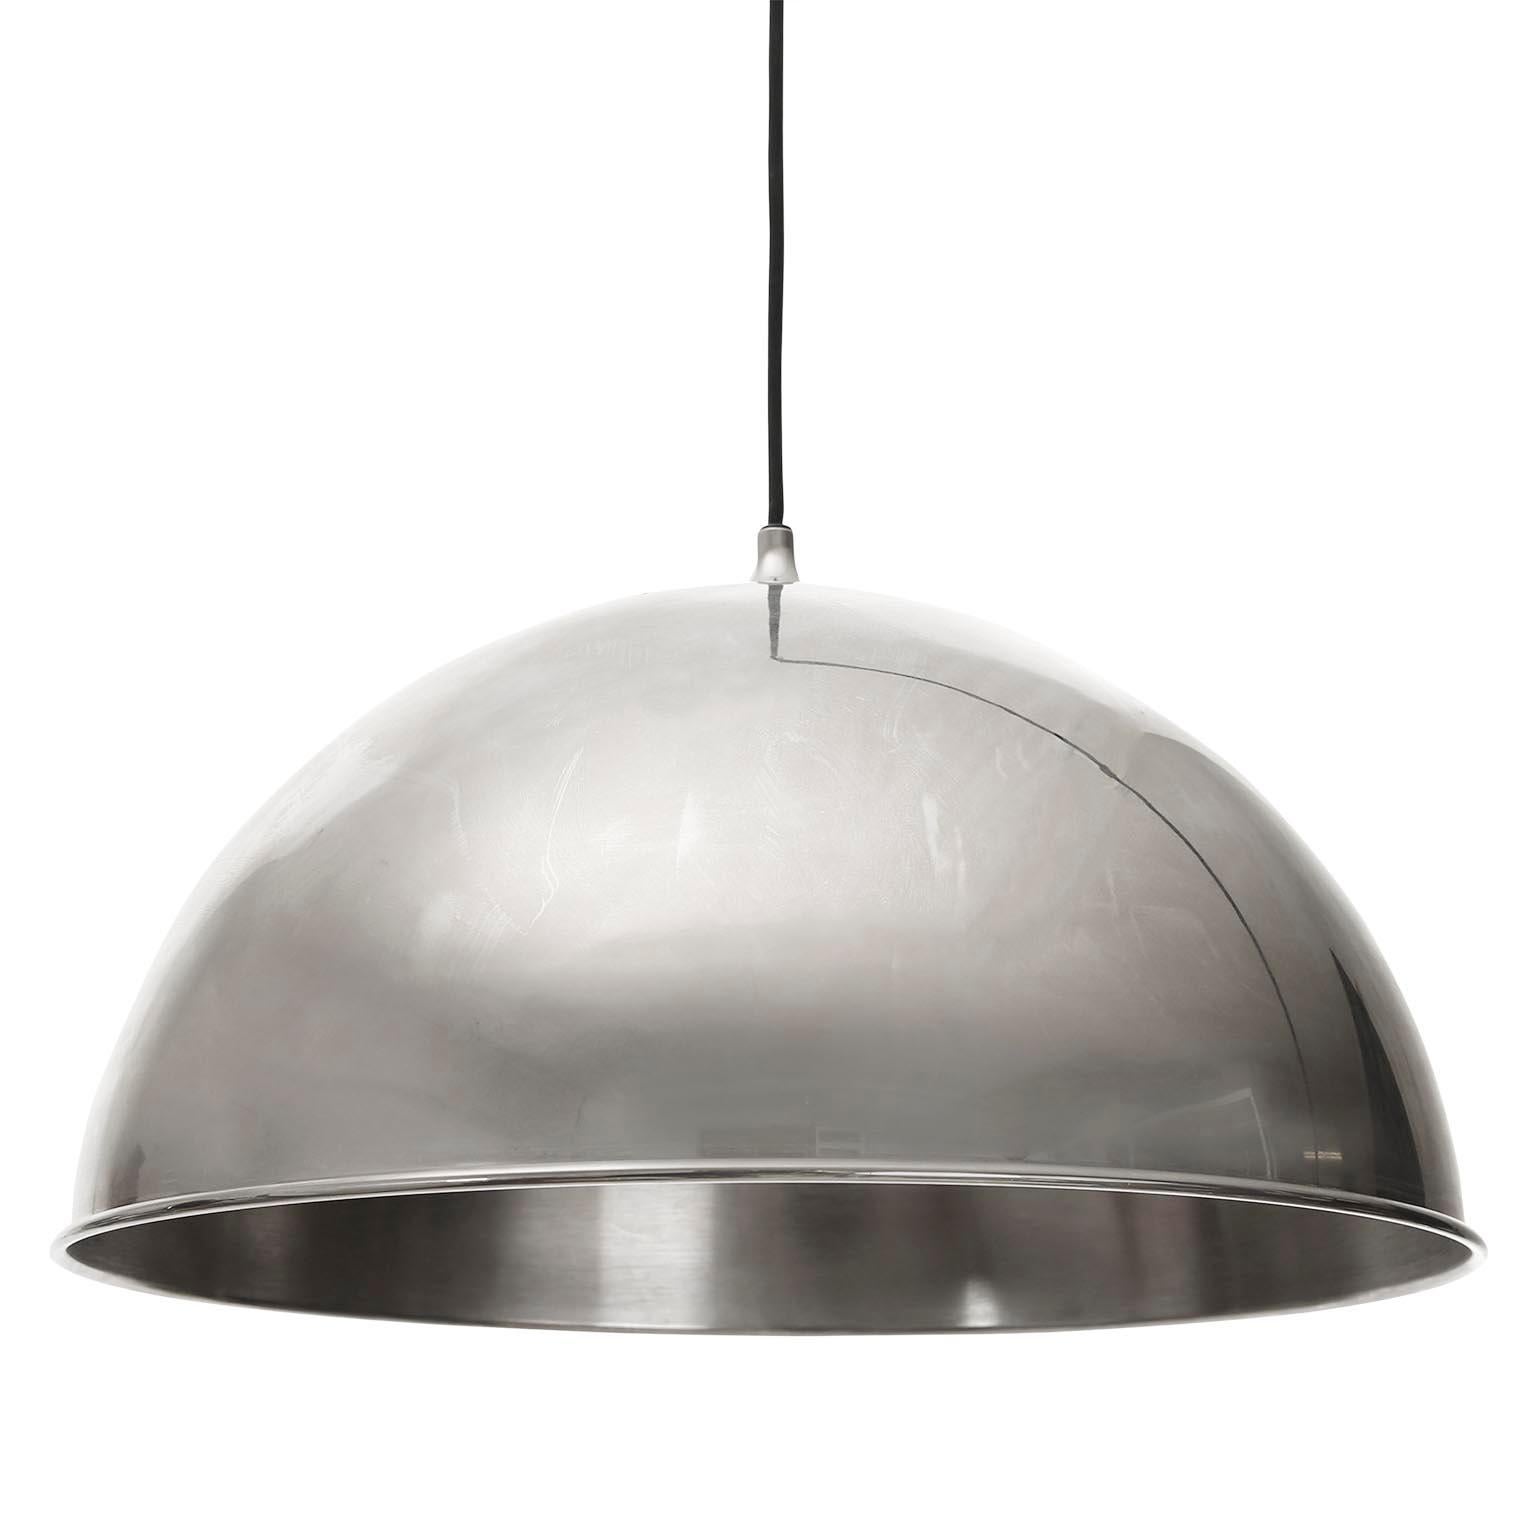 German Florian Schulz Pendant Light Counterweight Counterbalance Patinated Nickel, 1970 For Sale